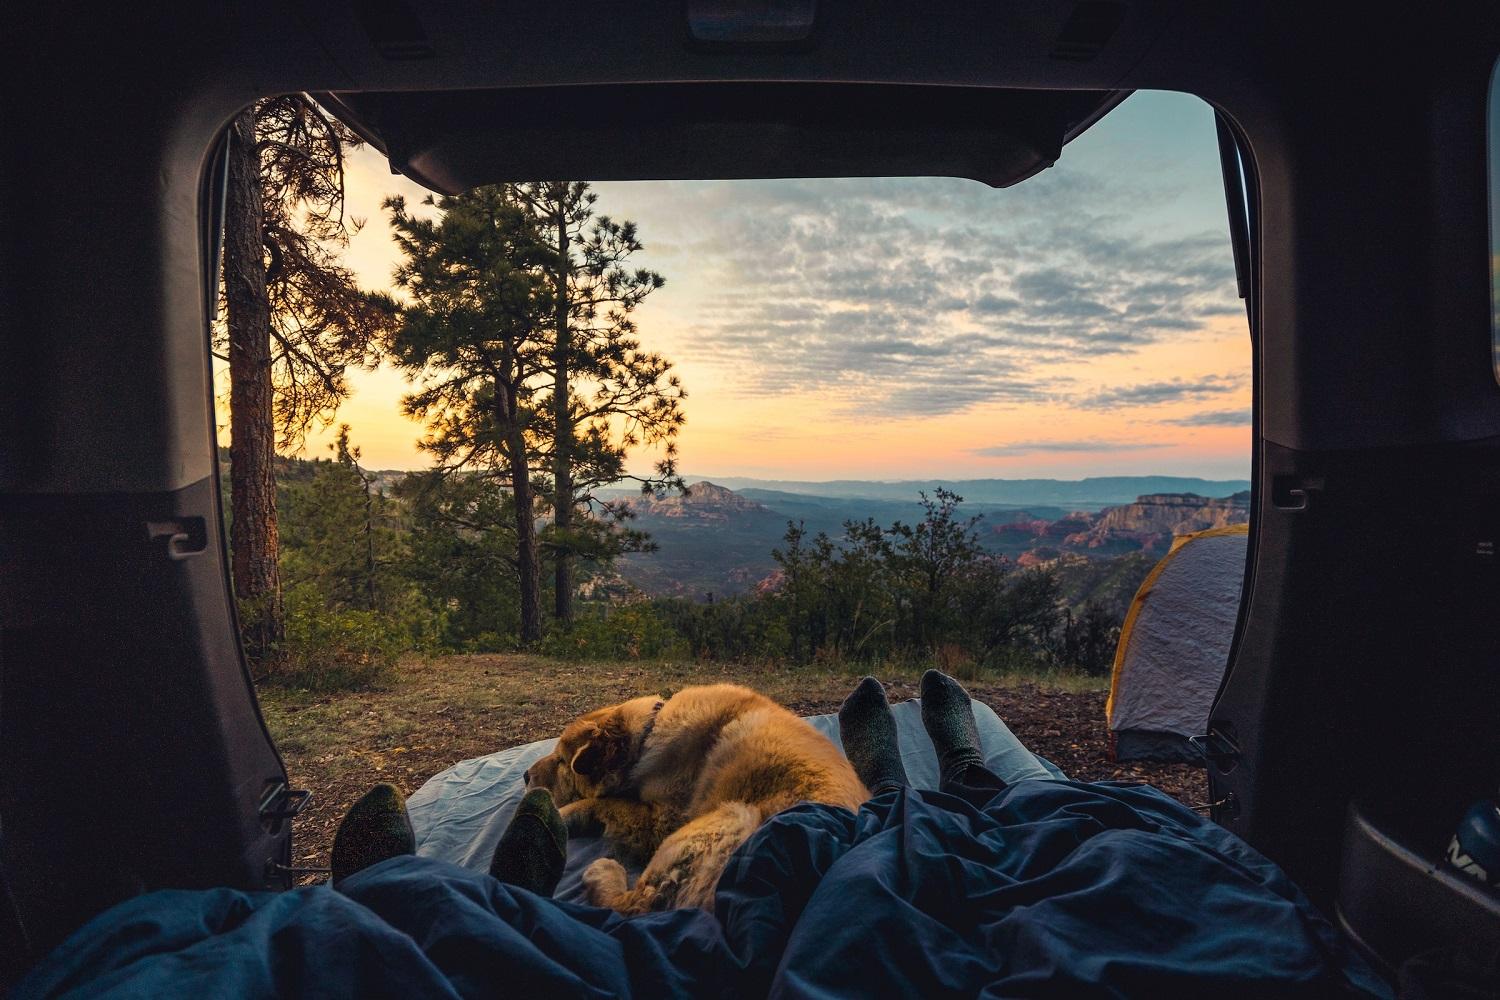 Getting Your Sleep in the Great Outdoors